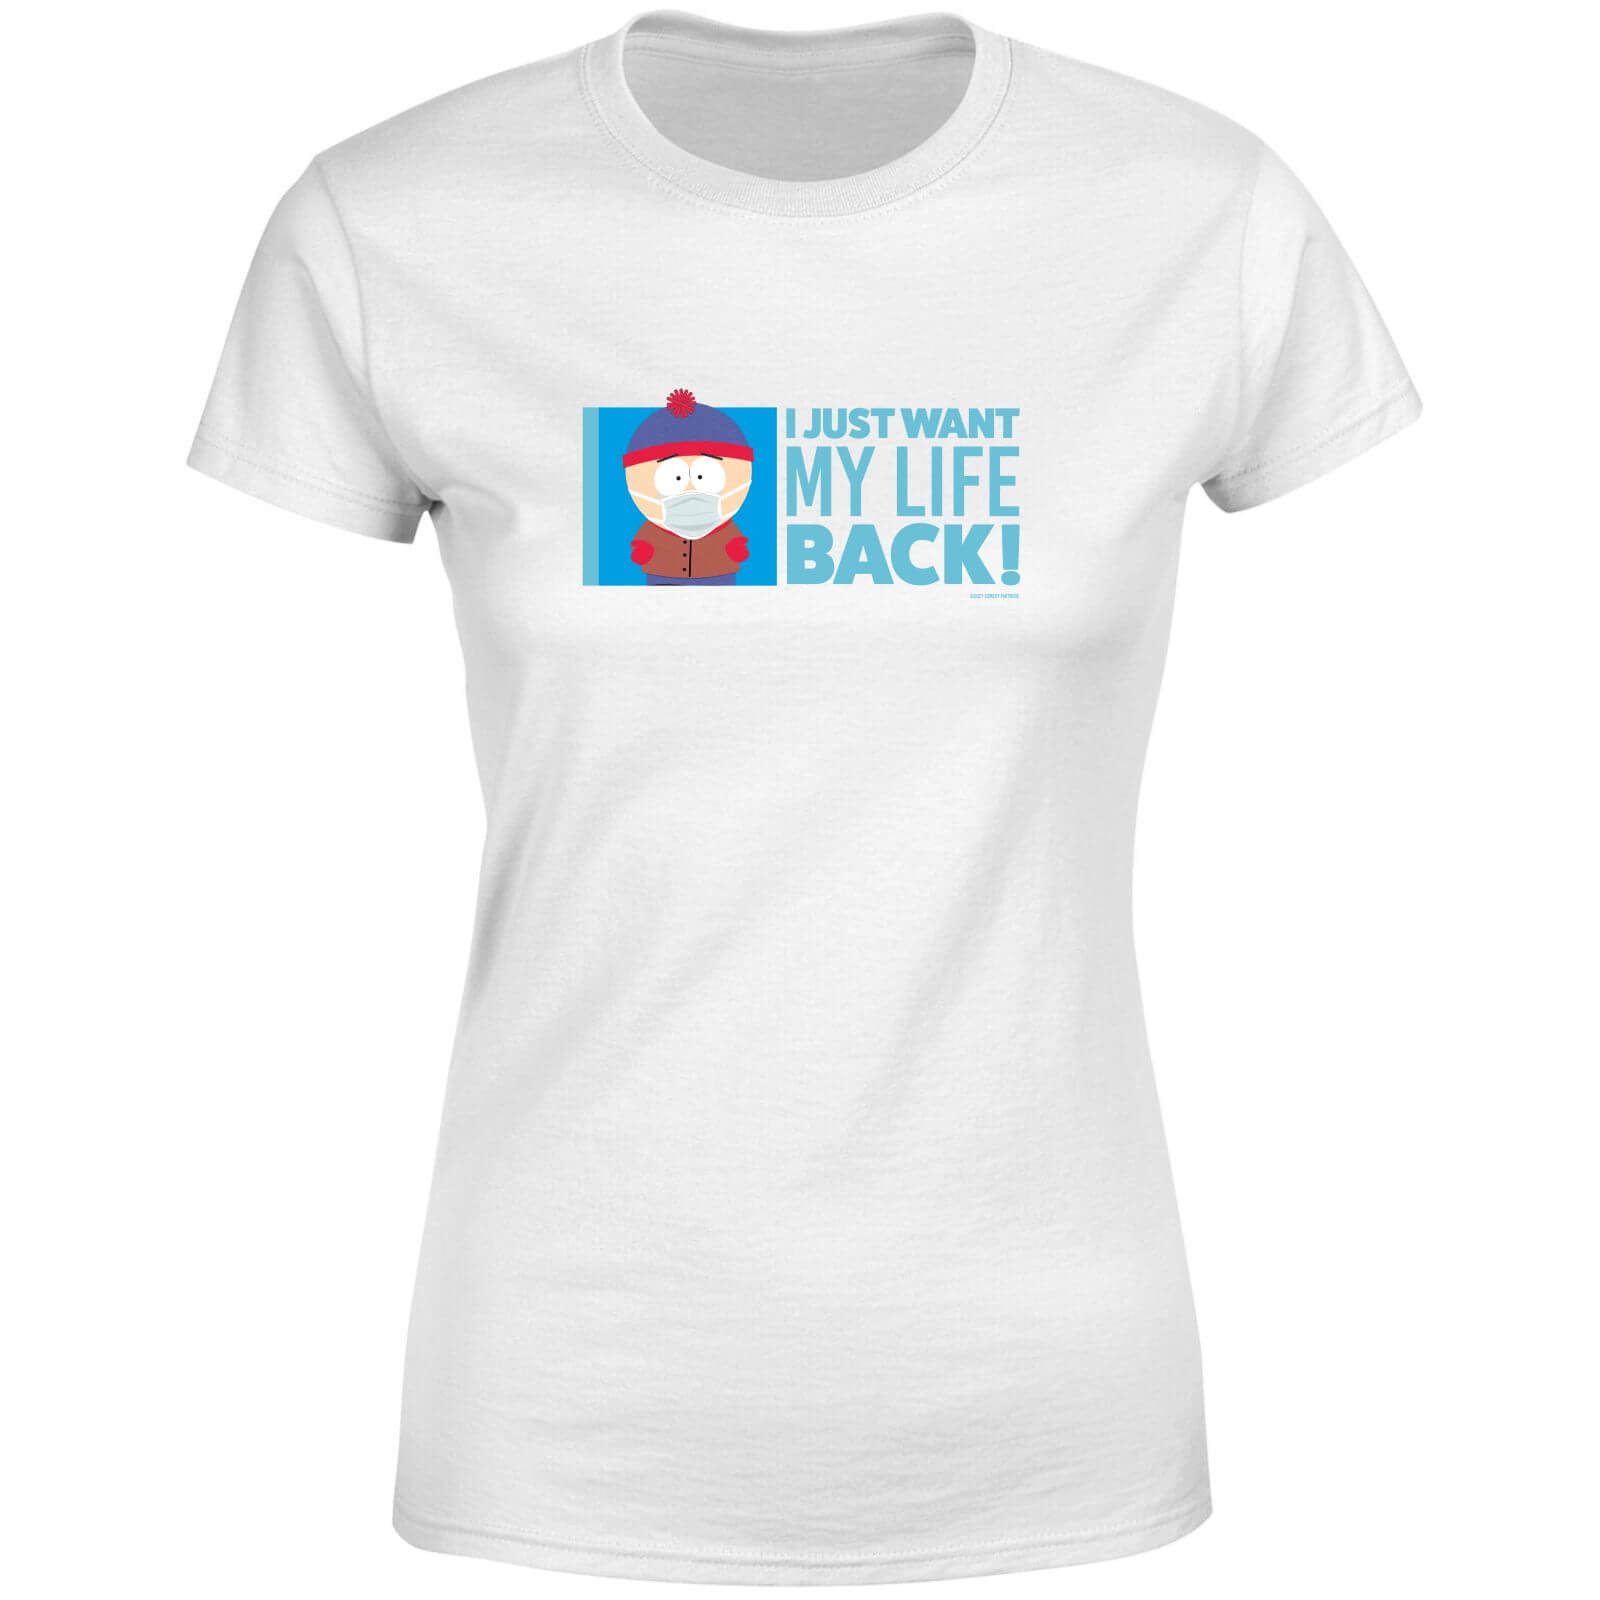 South Park I Just Want My Life Back Women%27s T-Shirt - White - S